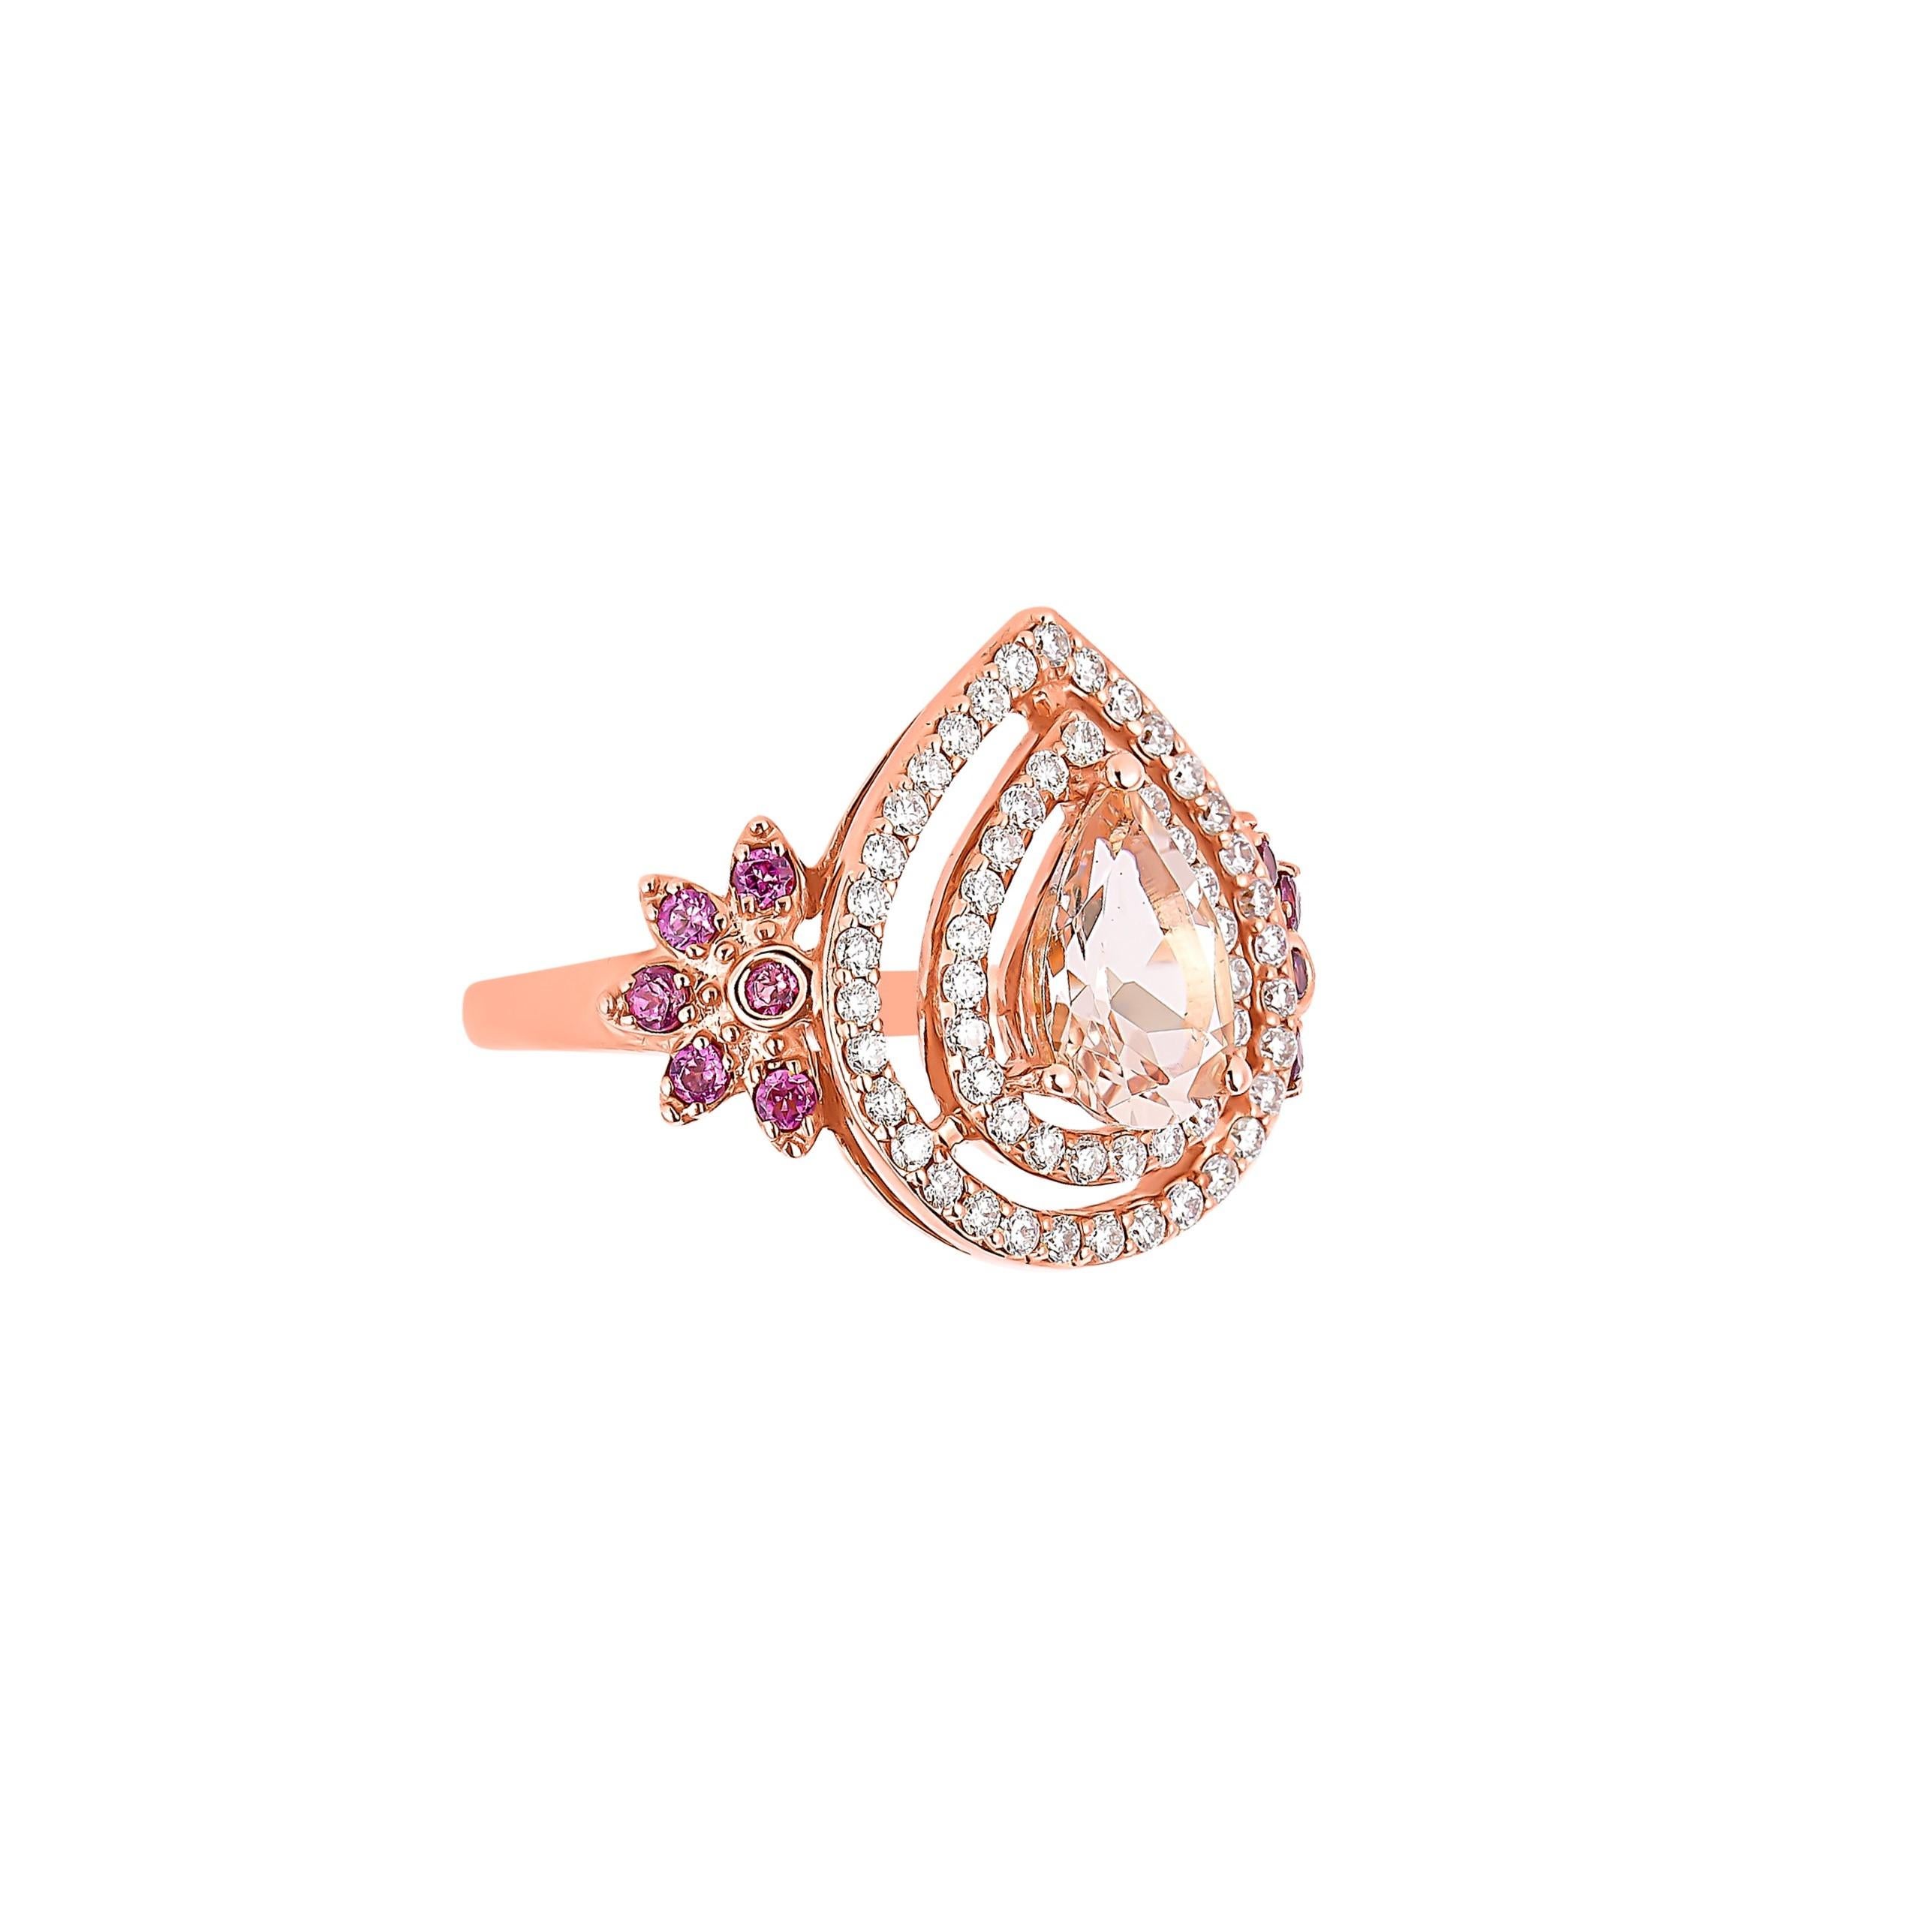 This collection features an array of magnificent morganites! Accented with diamonds these rings are made in rose gold and present a classic yet elegant look. 

Classic morganite ring in 18K rose gold with diamonds. 

Morganite: 1.235 carat pear